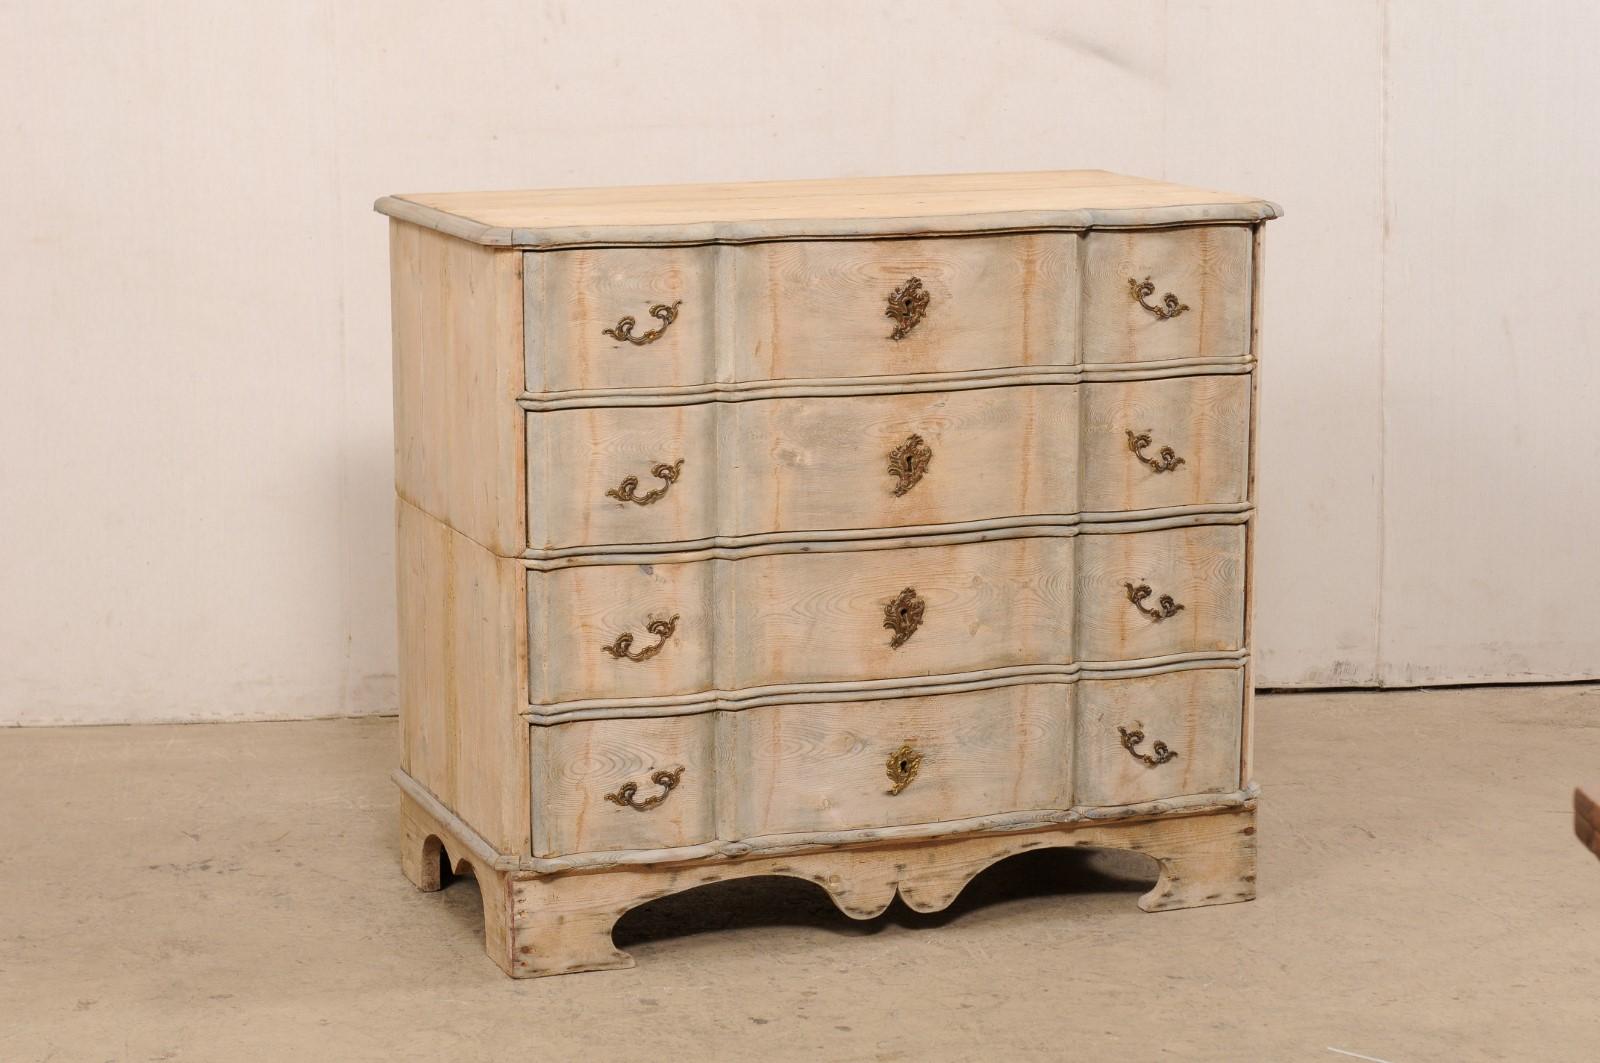 A Swedish period Rococo fir wood chest of four drawers from the 18th century. This antique chest-on-chest from Sweden consists of two casement pieces, one stacking atop the other, which combined house a total of four dove-tailed drawers. The chest